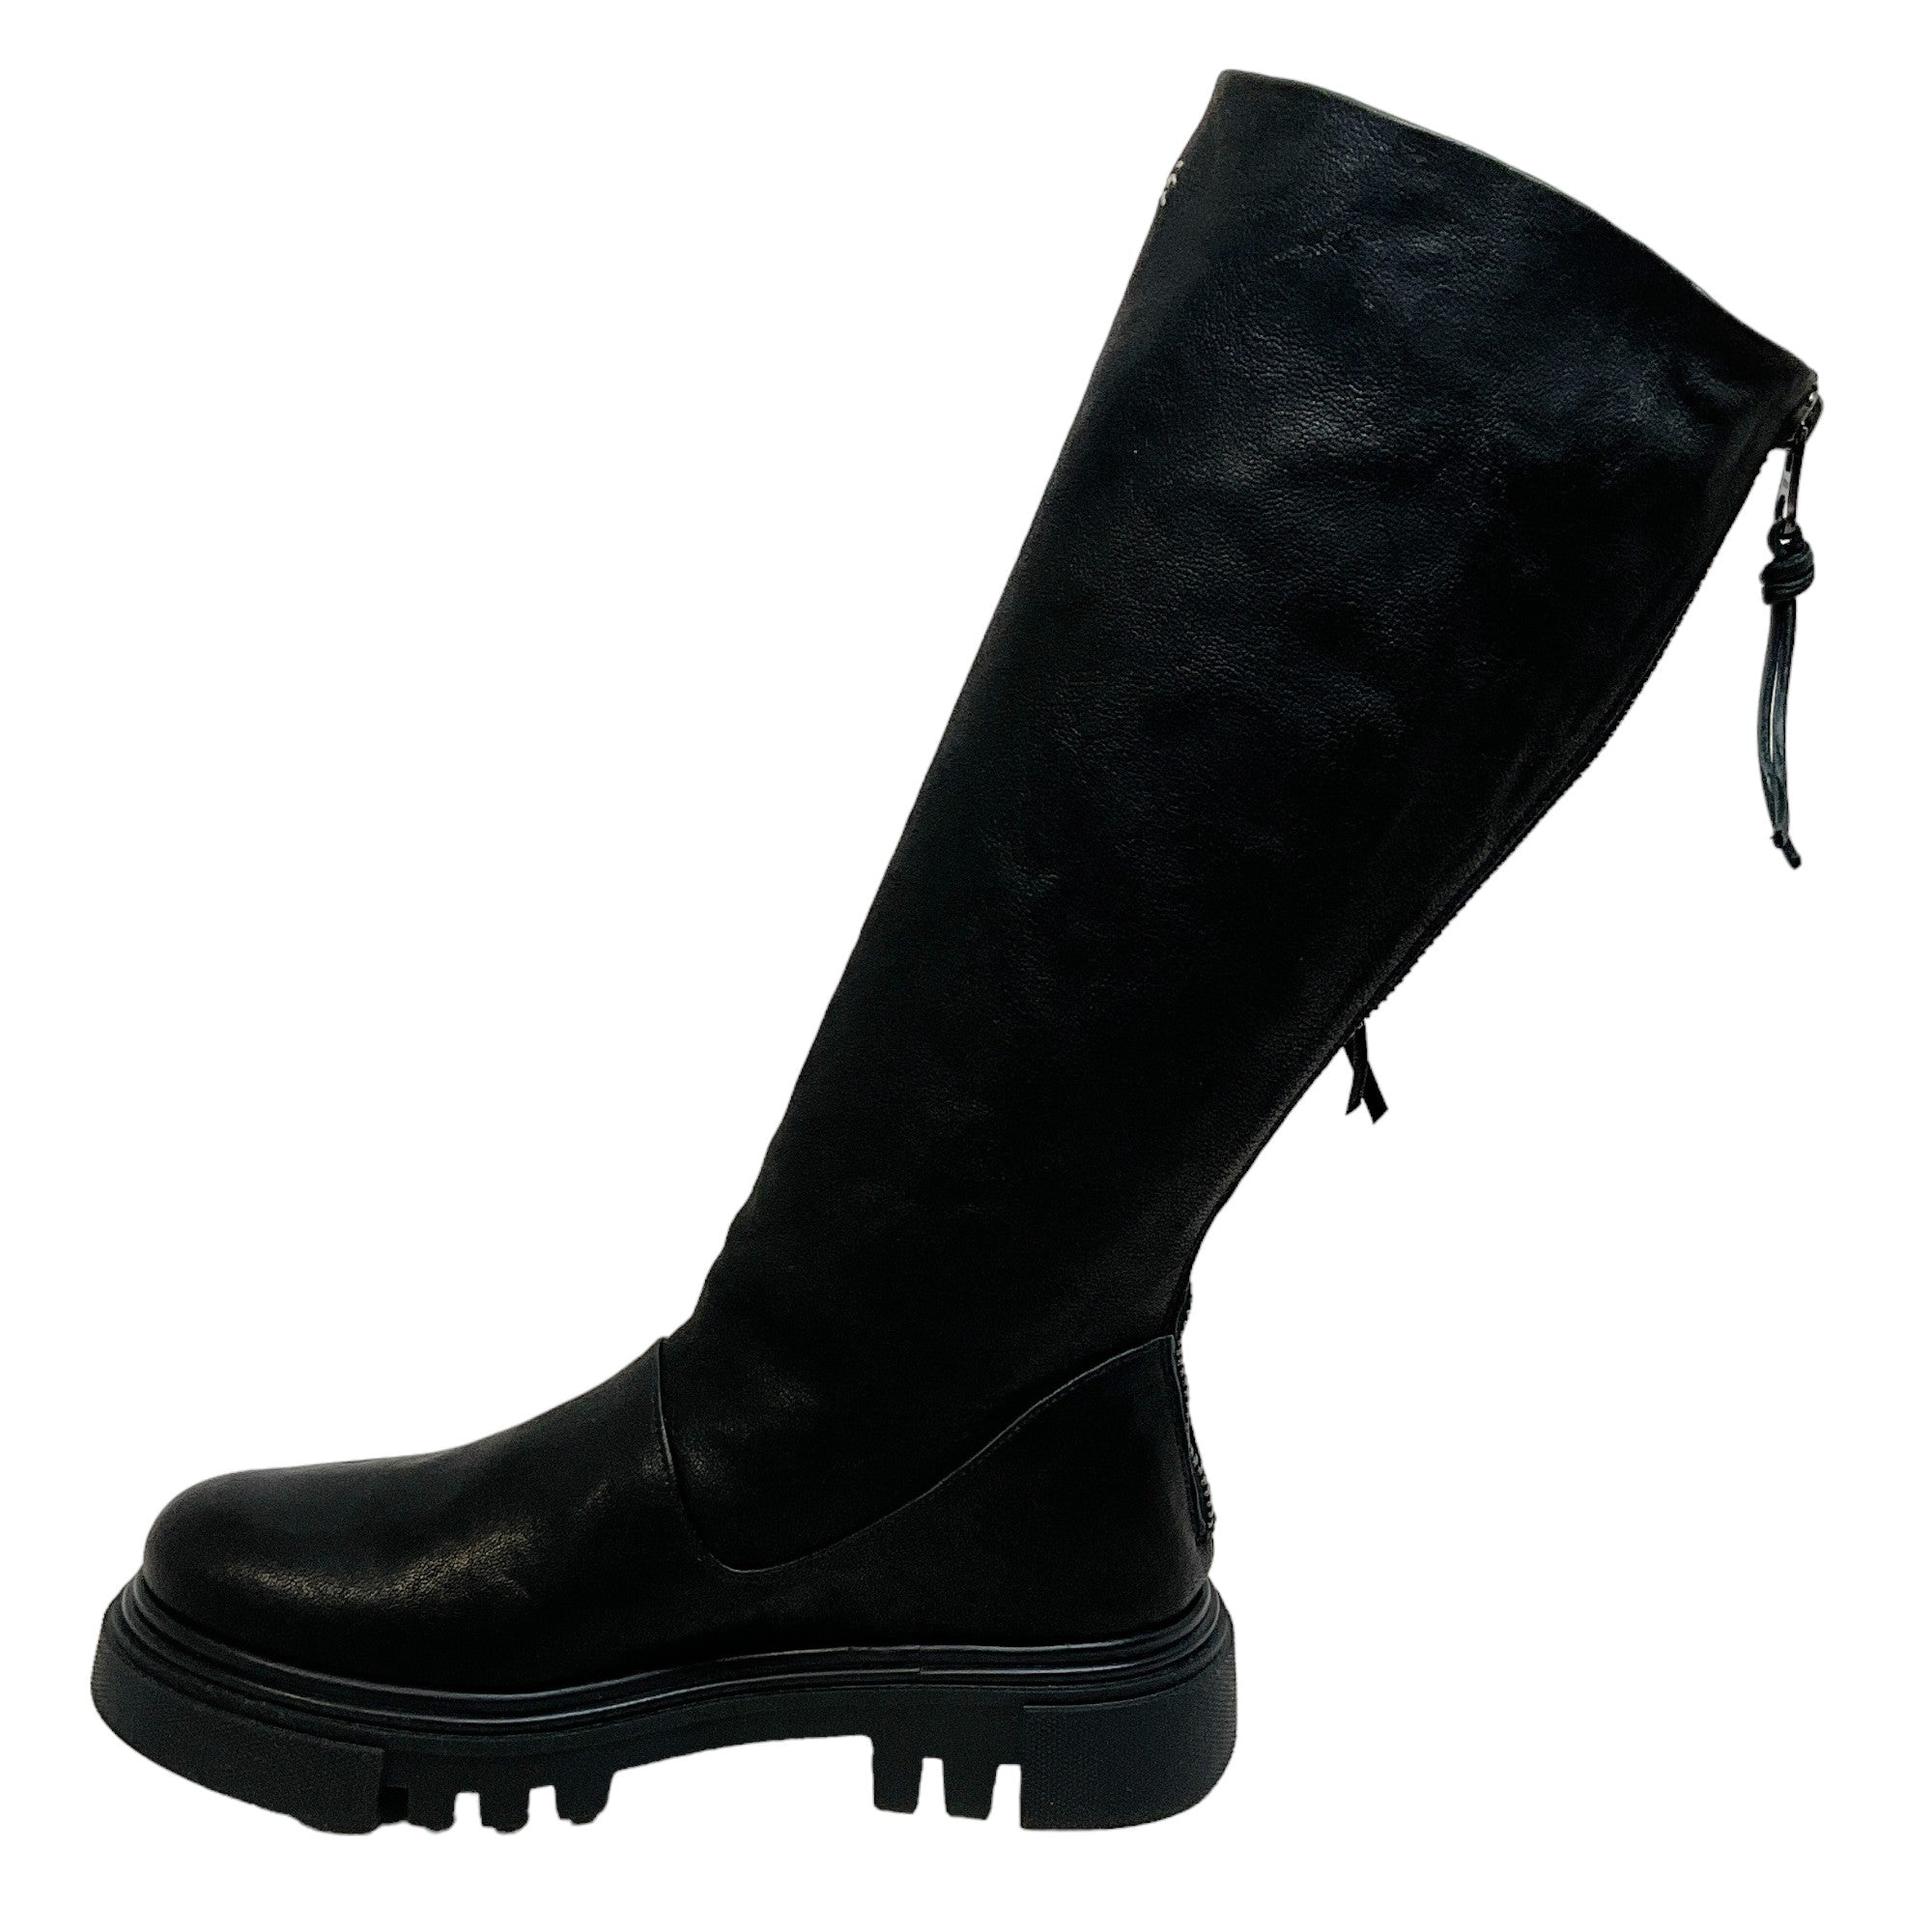 Henry Beguelin Black Leather Stivale Boots